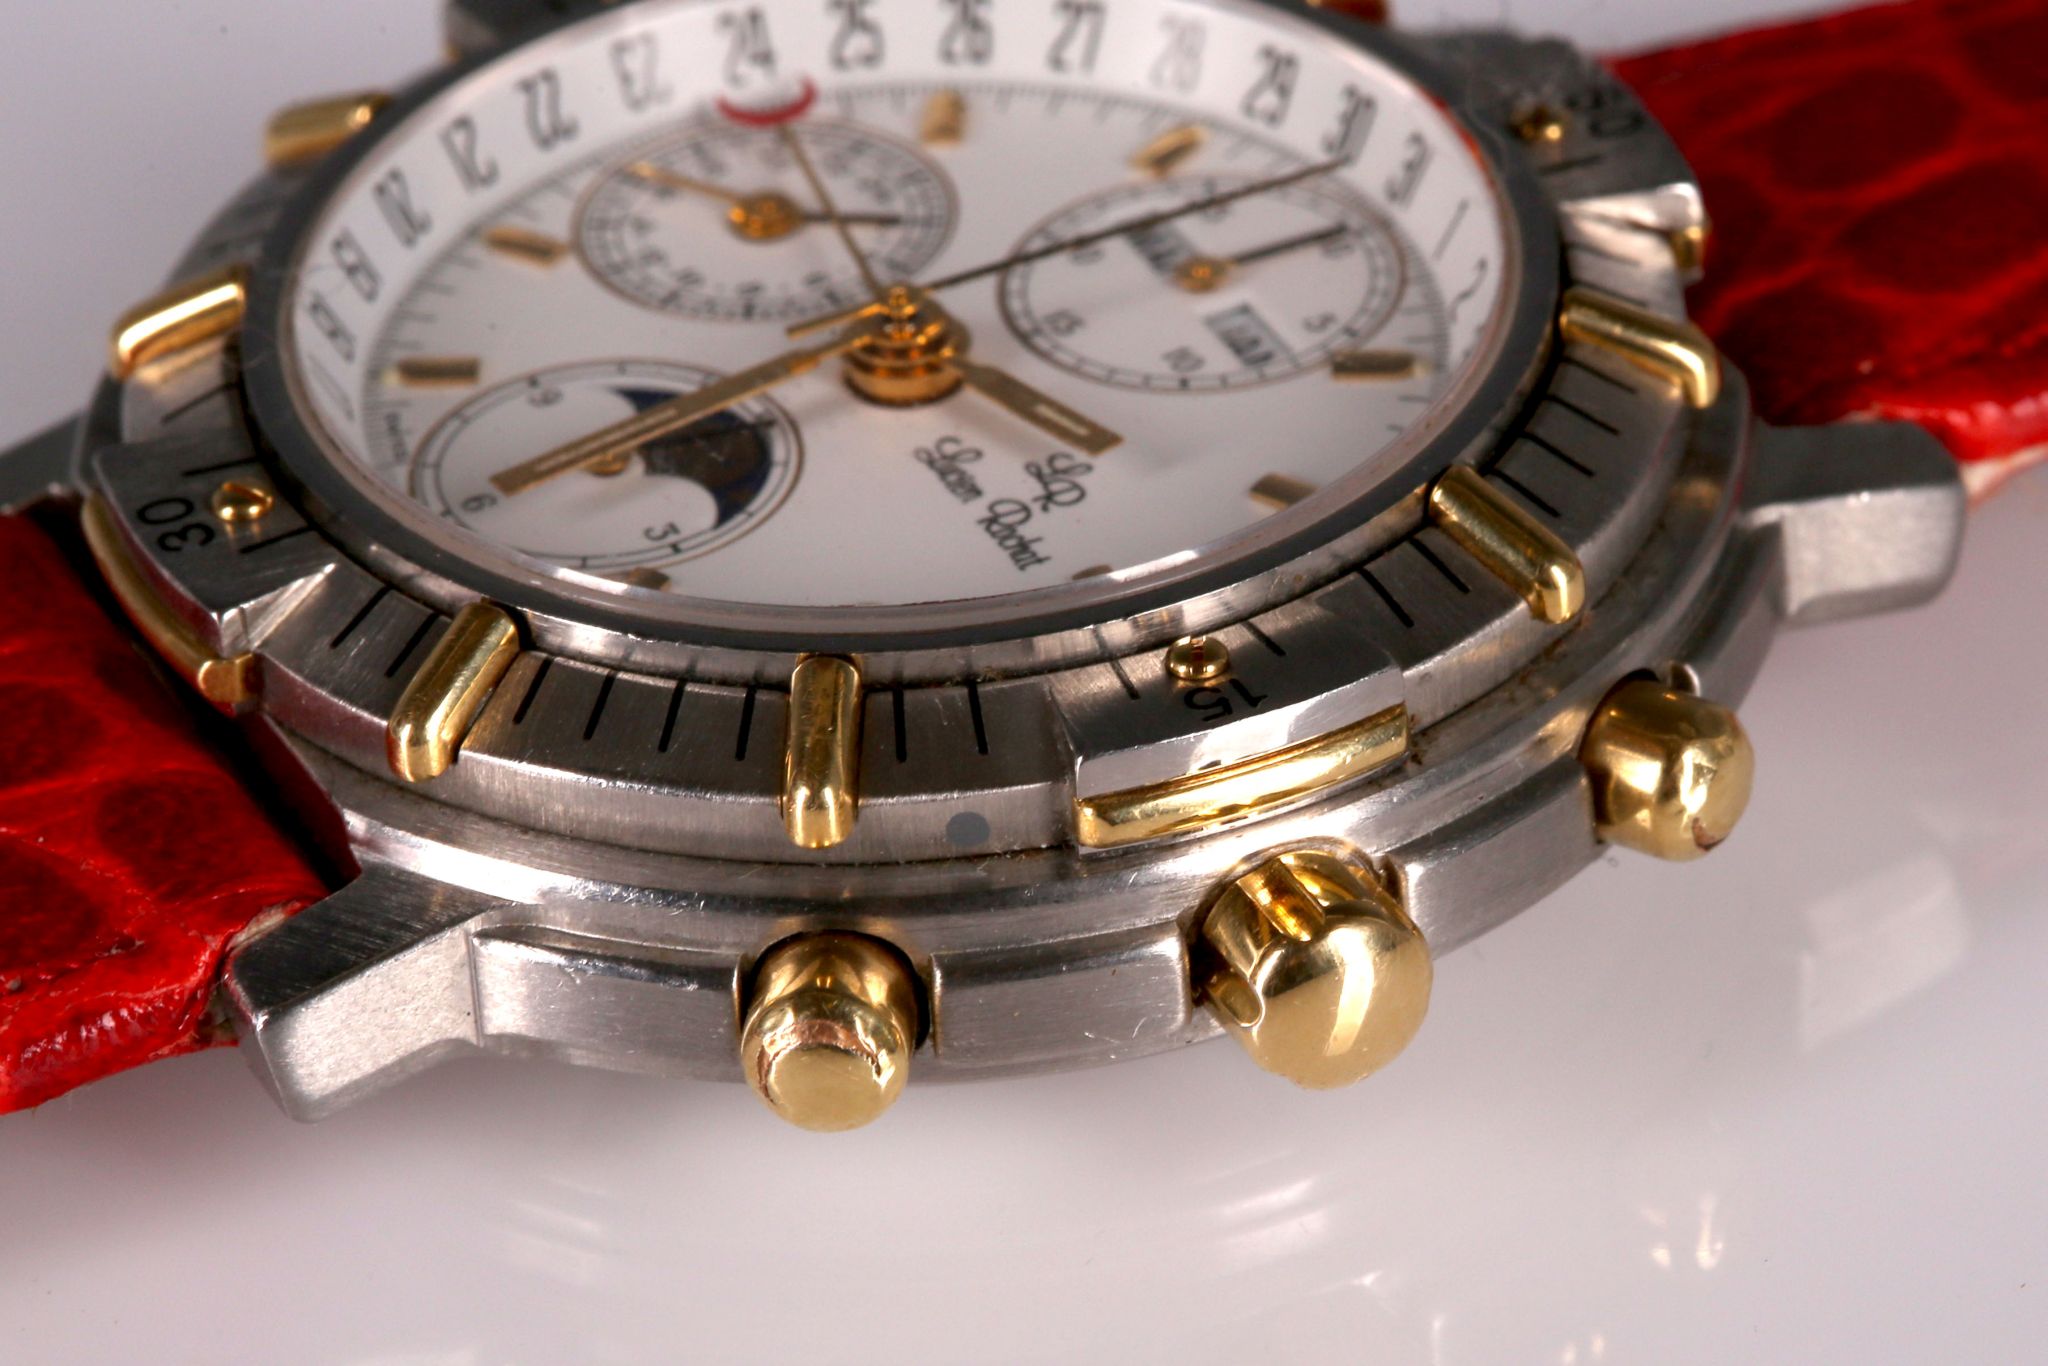 A gents Lucien Rochat chronograph wristwatch in stainless steel, white 18ct gold embellished - Image 3 of 4